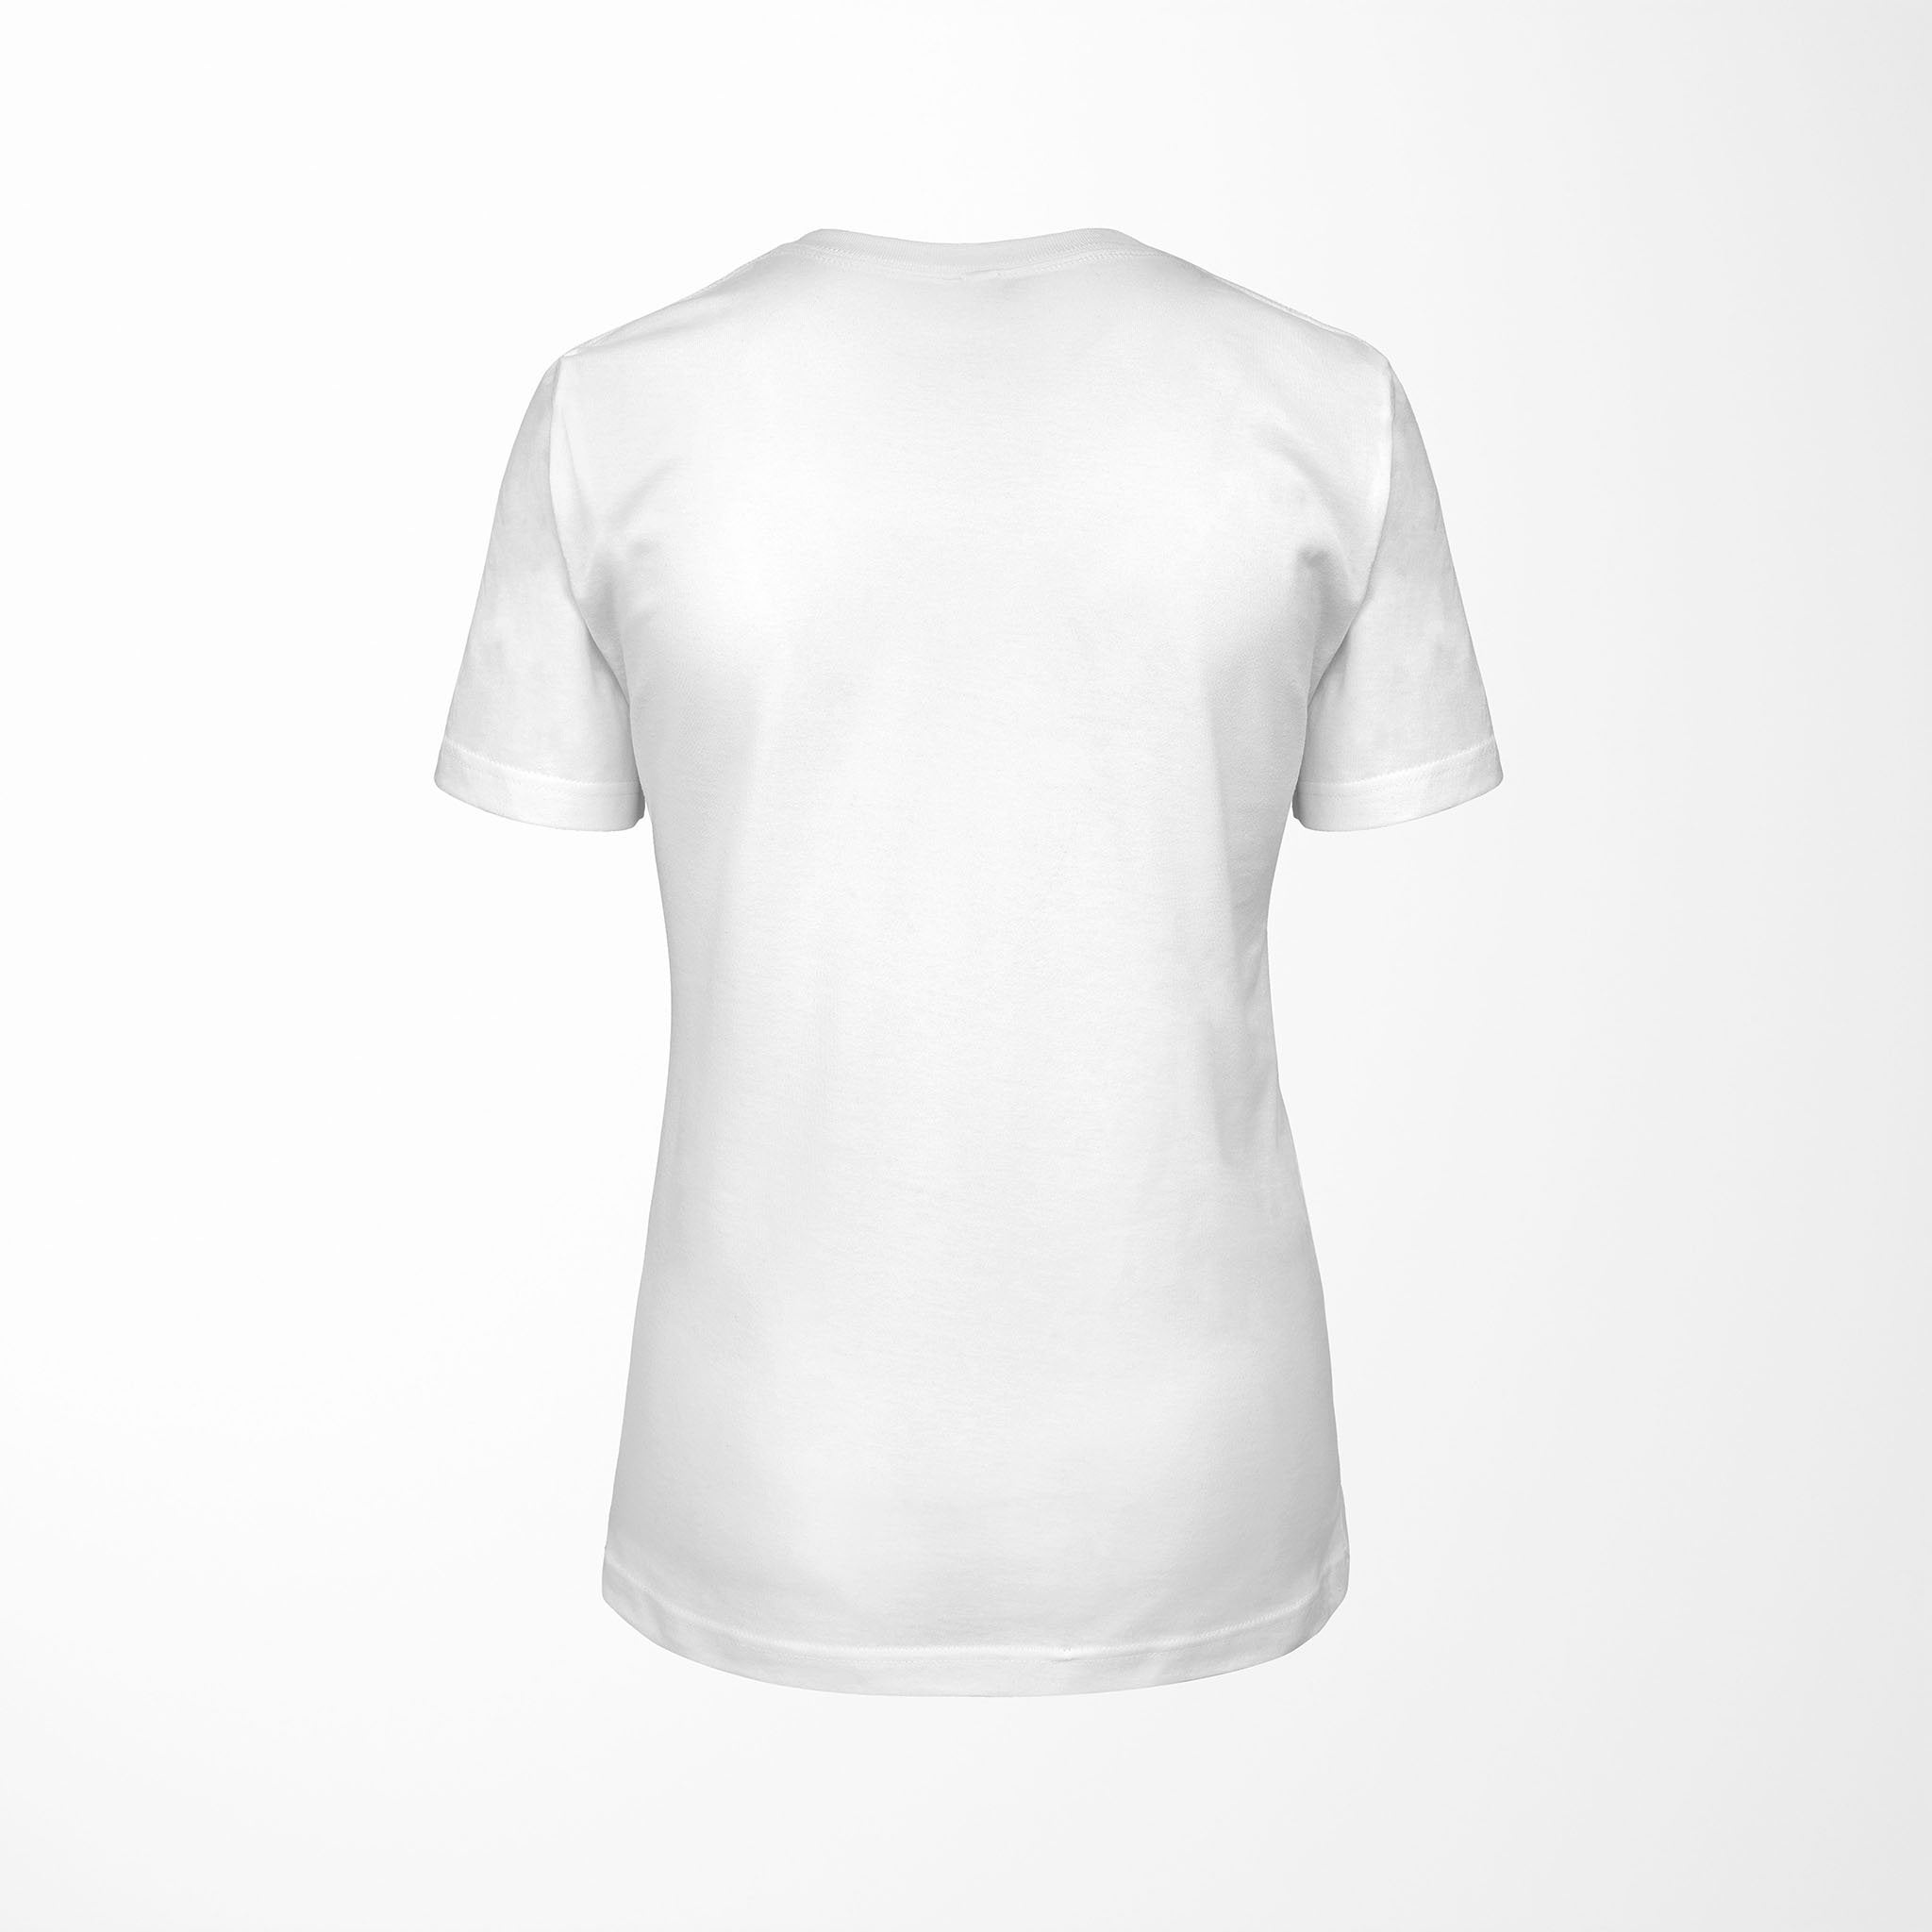 ELEMENTS Relaxed Fit Women's 100% Cotton White T-Shirt back